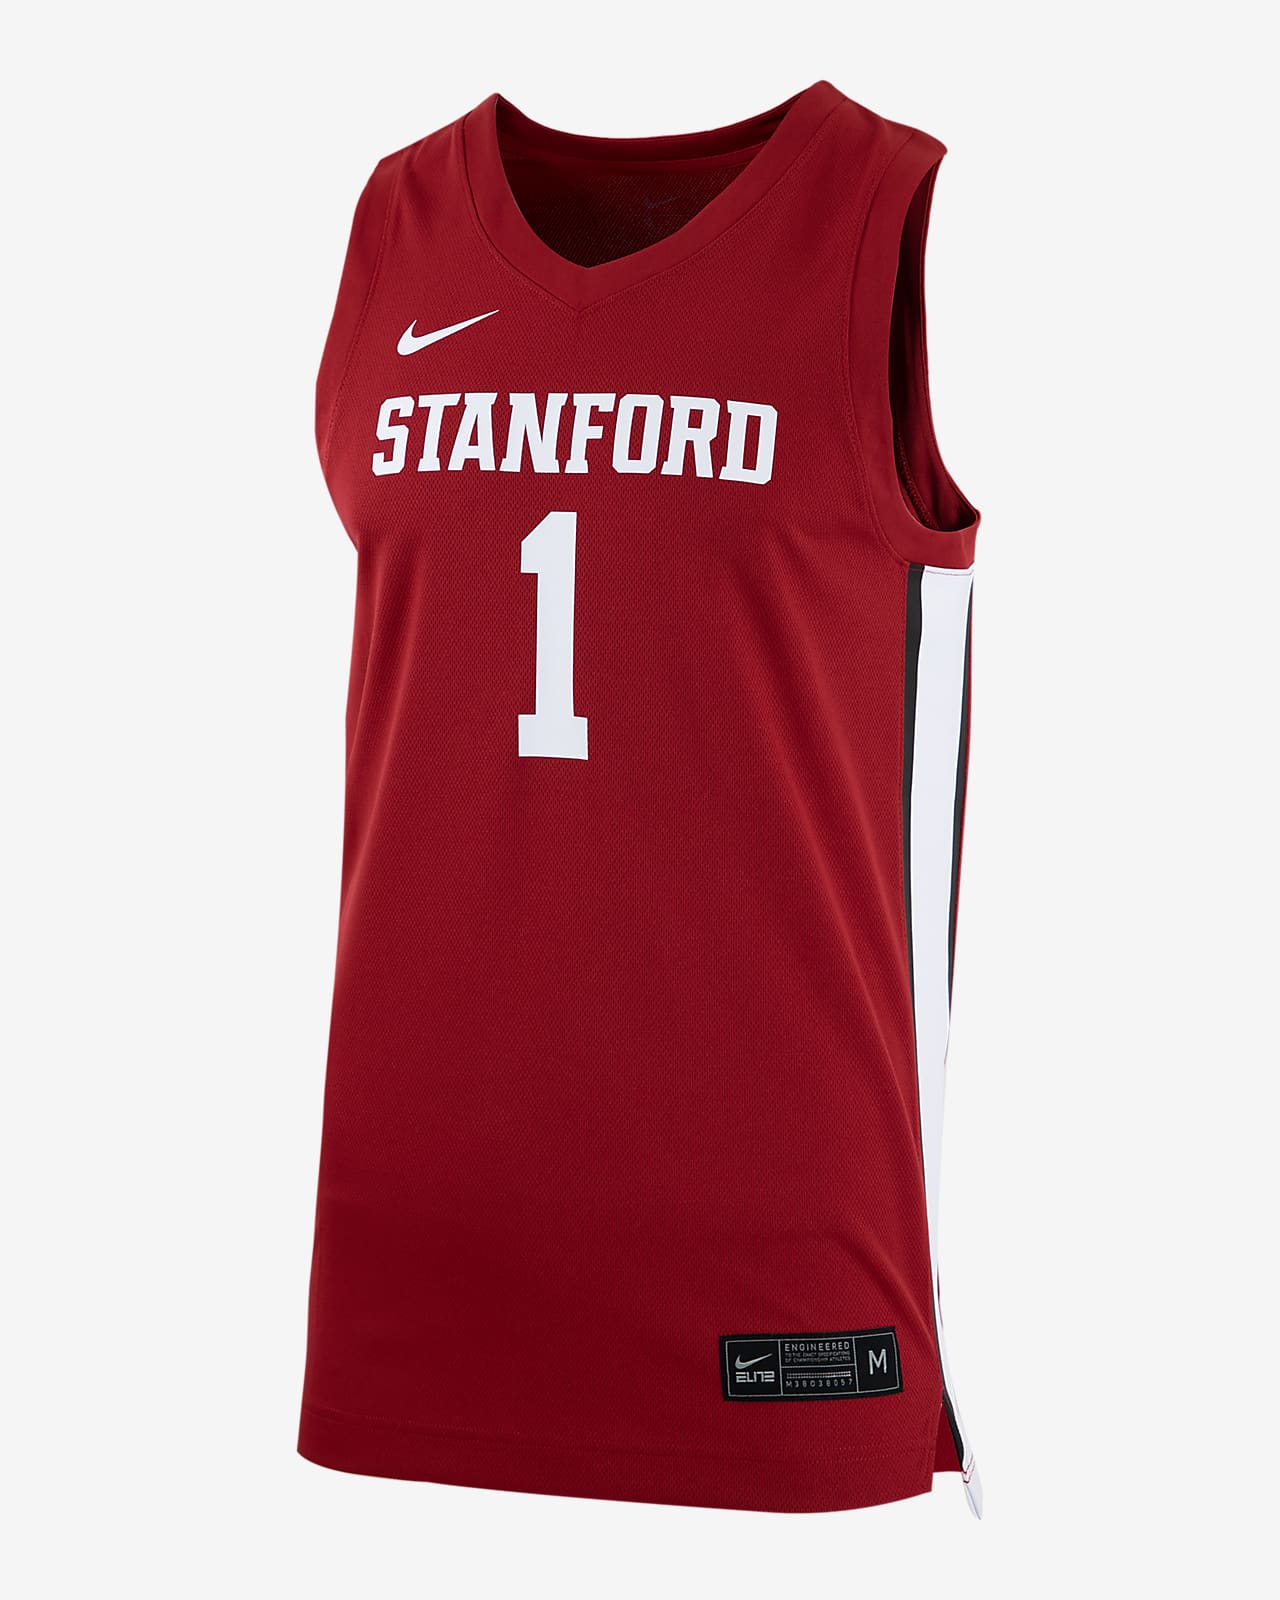 Nike College (Stanford) Basketball Jersey